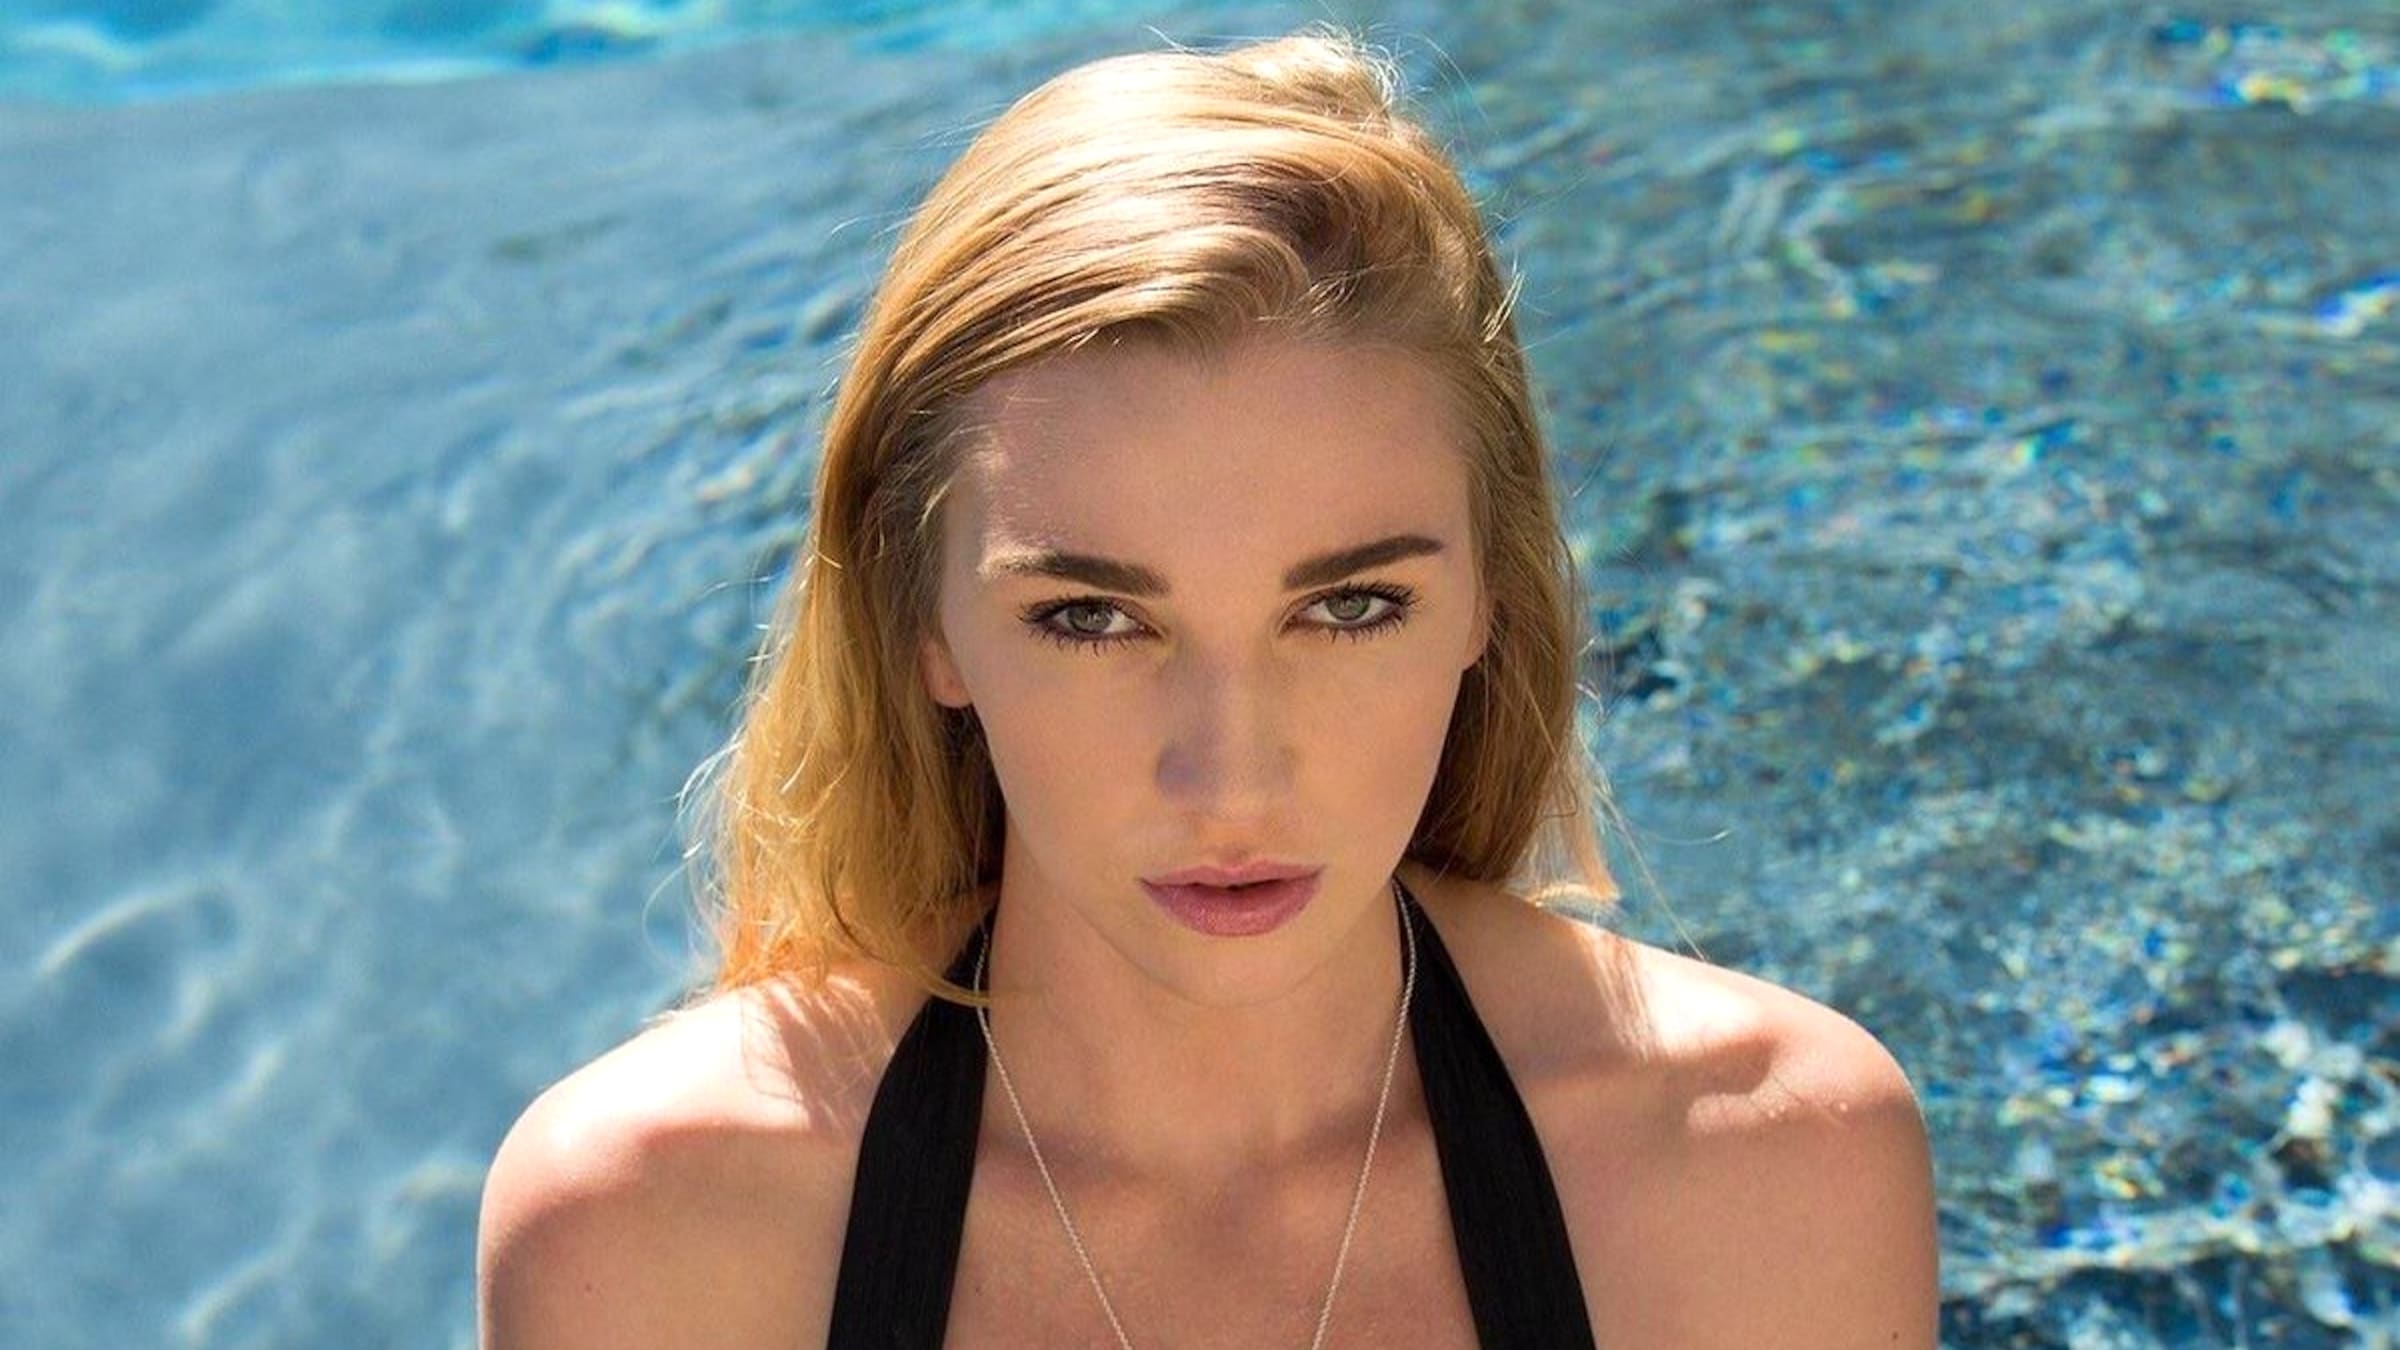 Kendra Sleeping Fuck Boy Vedio - Porn Star Kendra Sunderland Booted Off Instagram After 'Joking' About Sex  With CEO Adam Mosseri